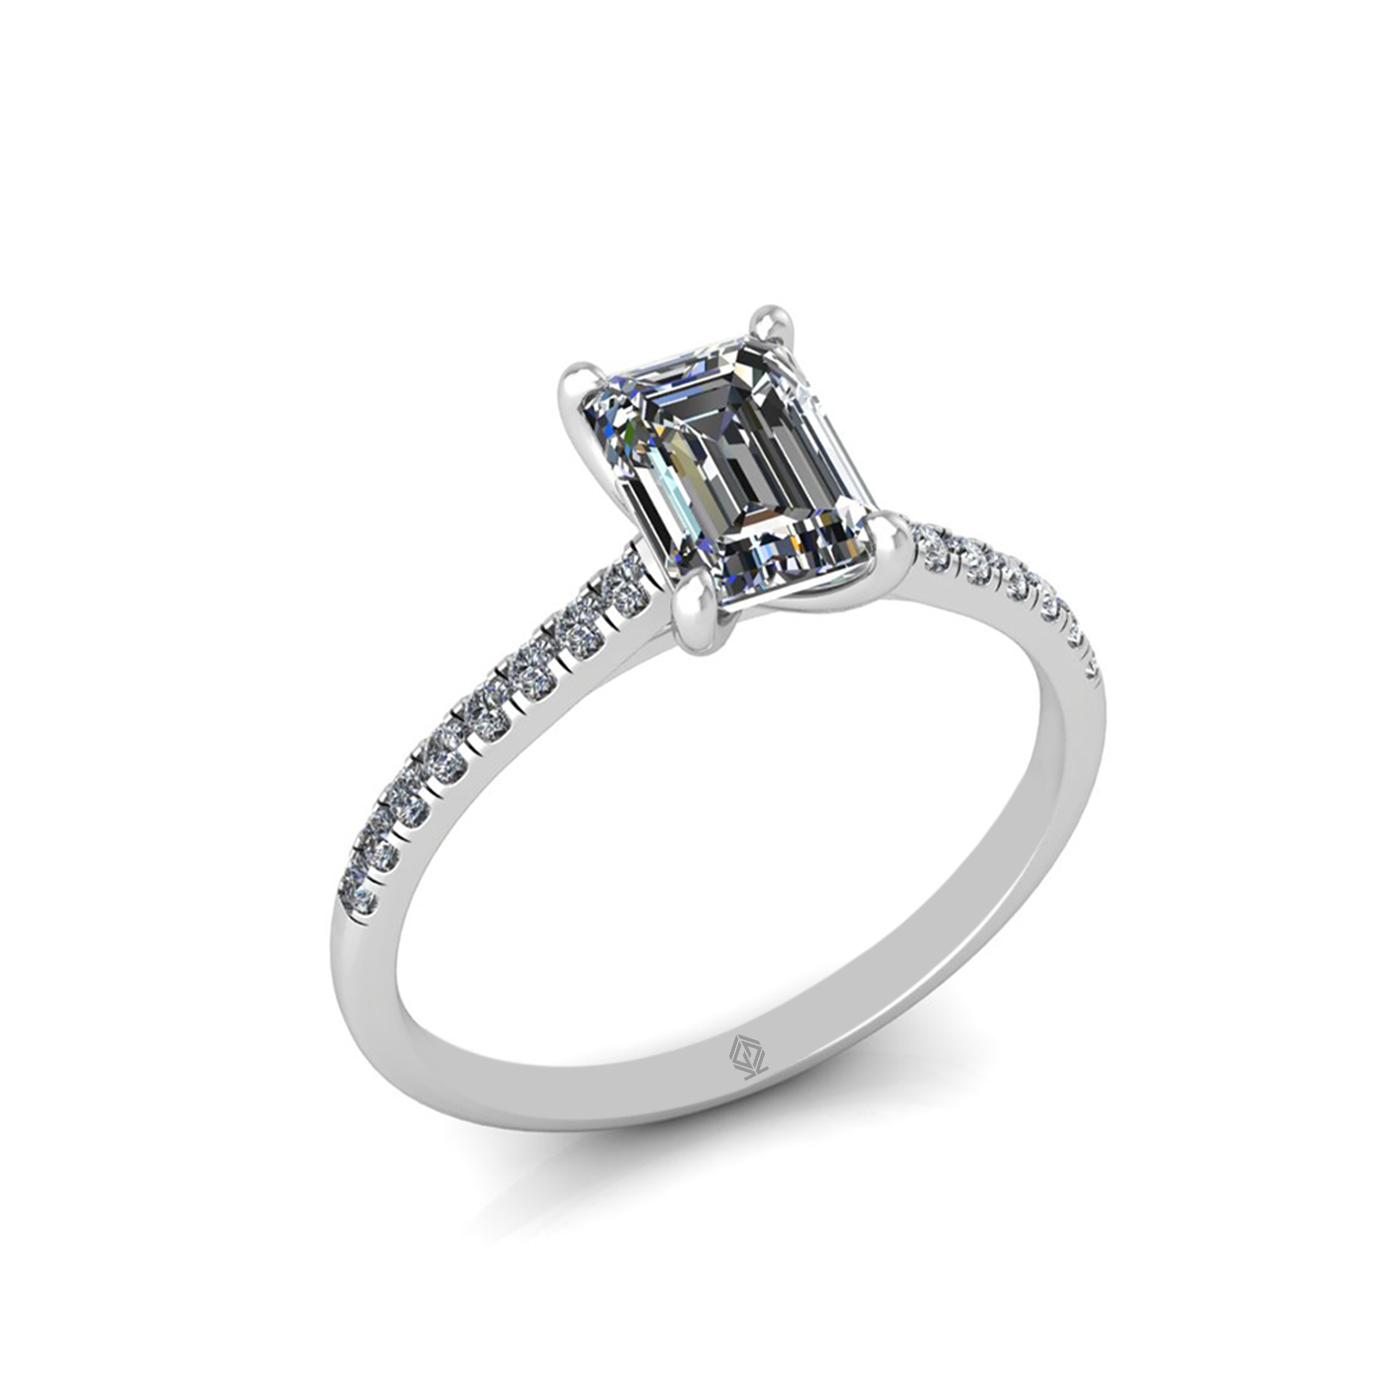 18k white gold 1.0ct 4 prongs emerald cut diamond engagement ring with whisper thin pavÉ set band